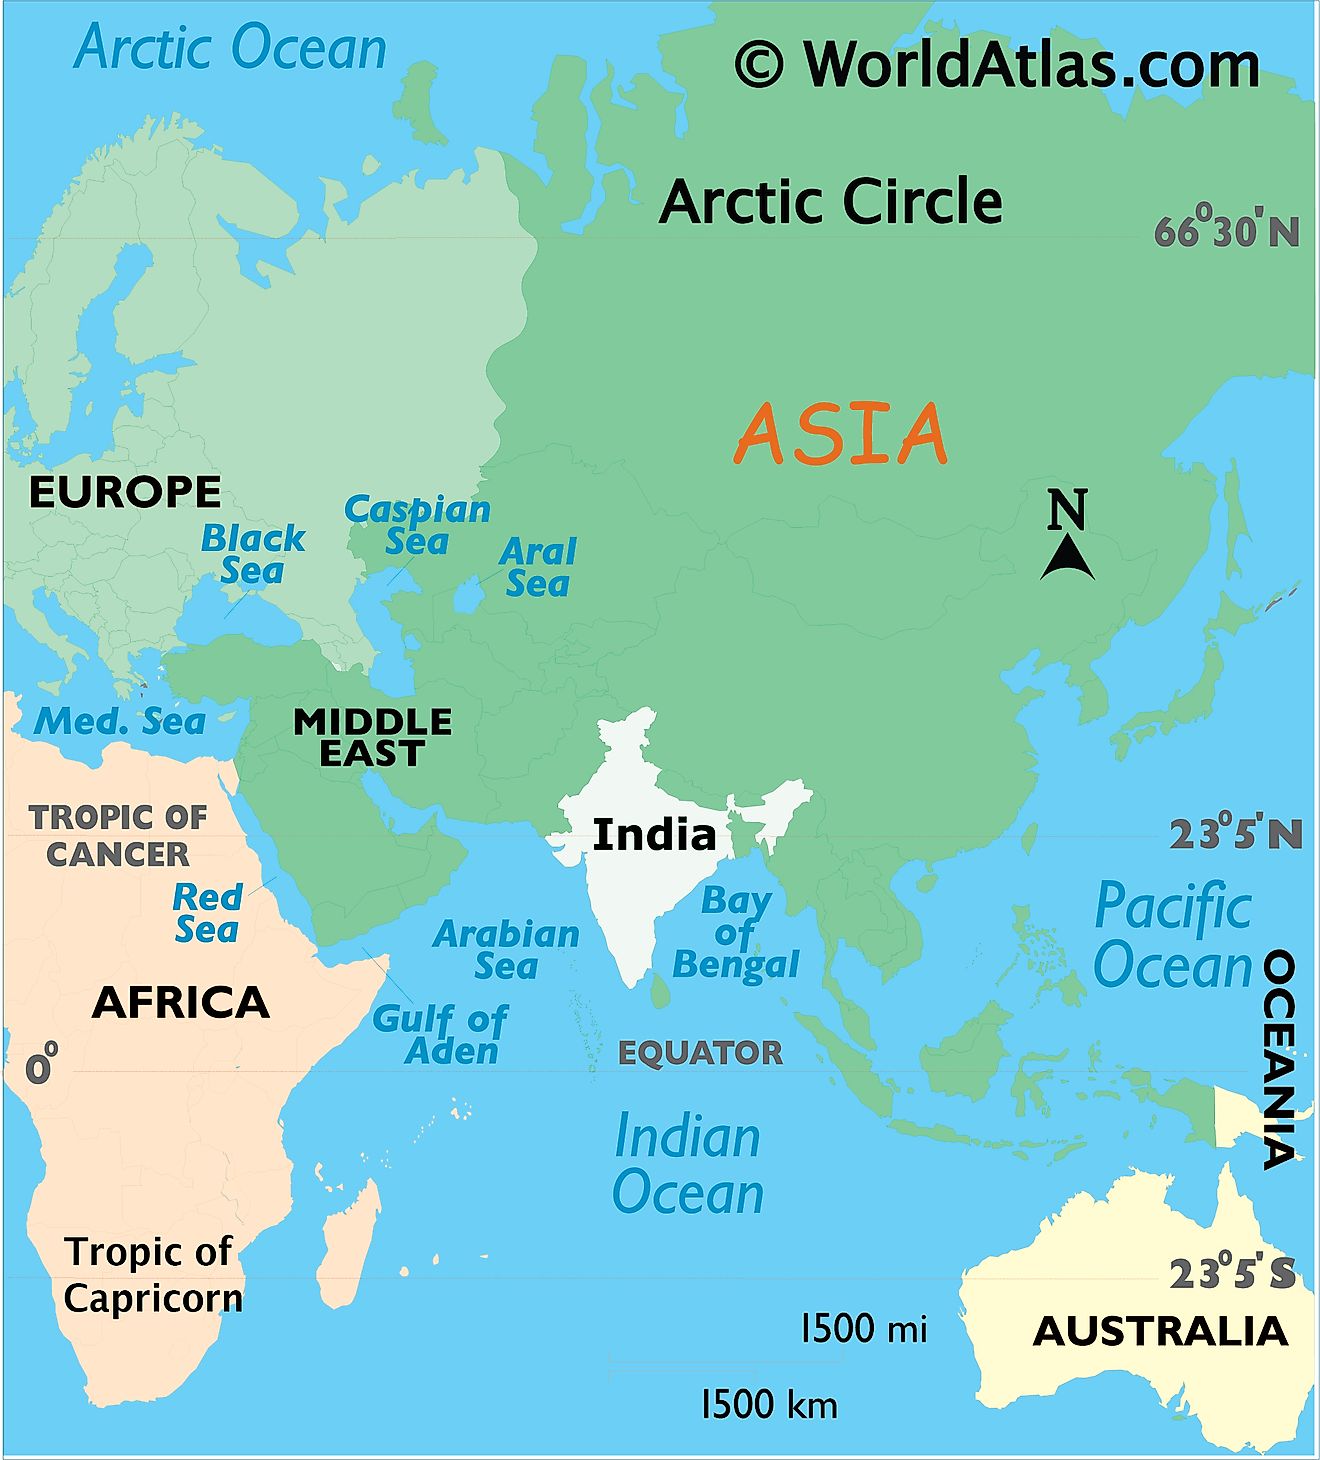 Map showing India's position in the world.